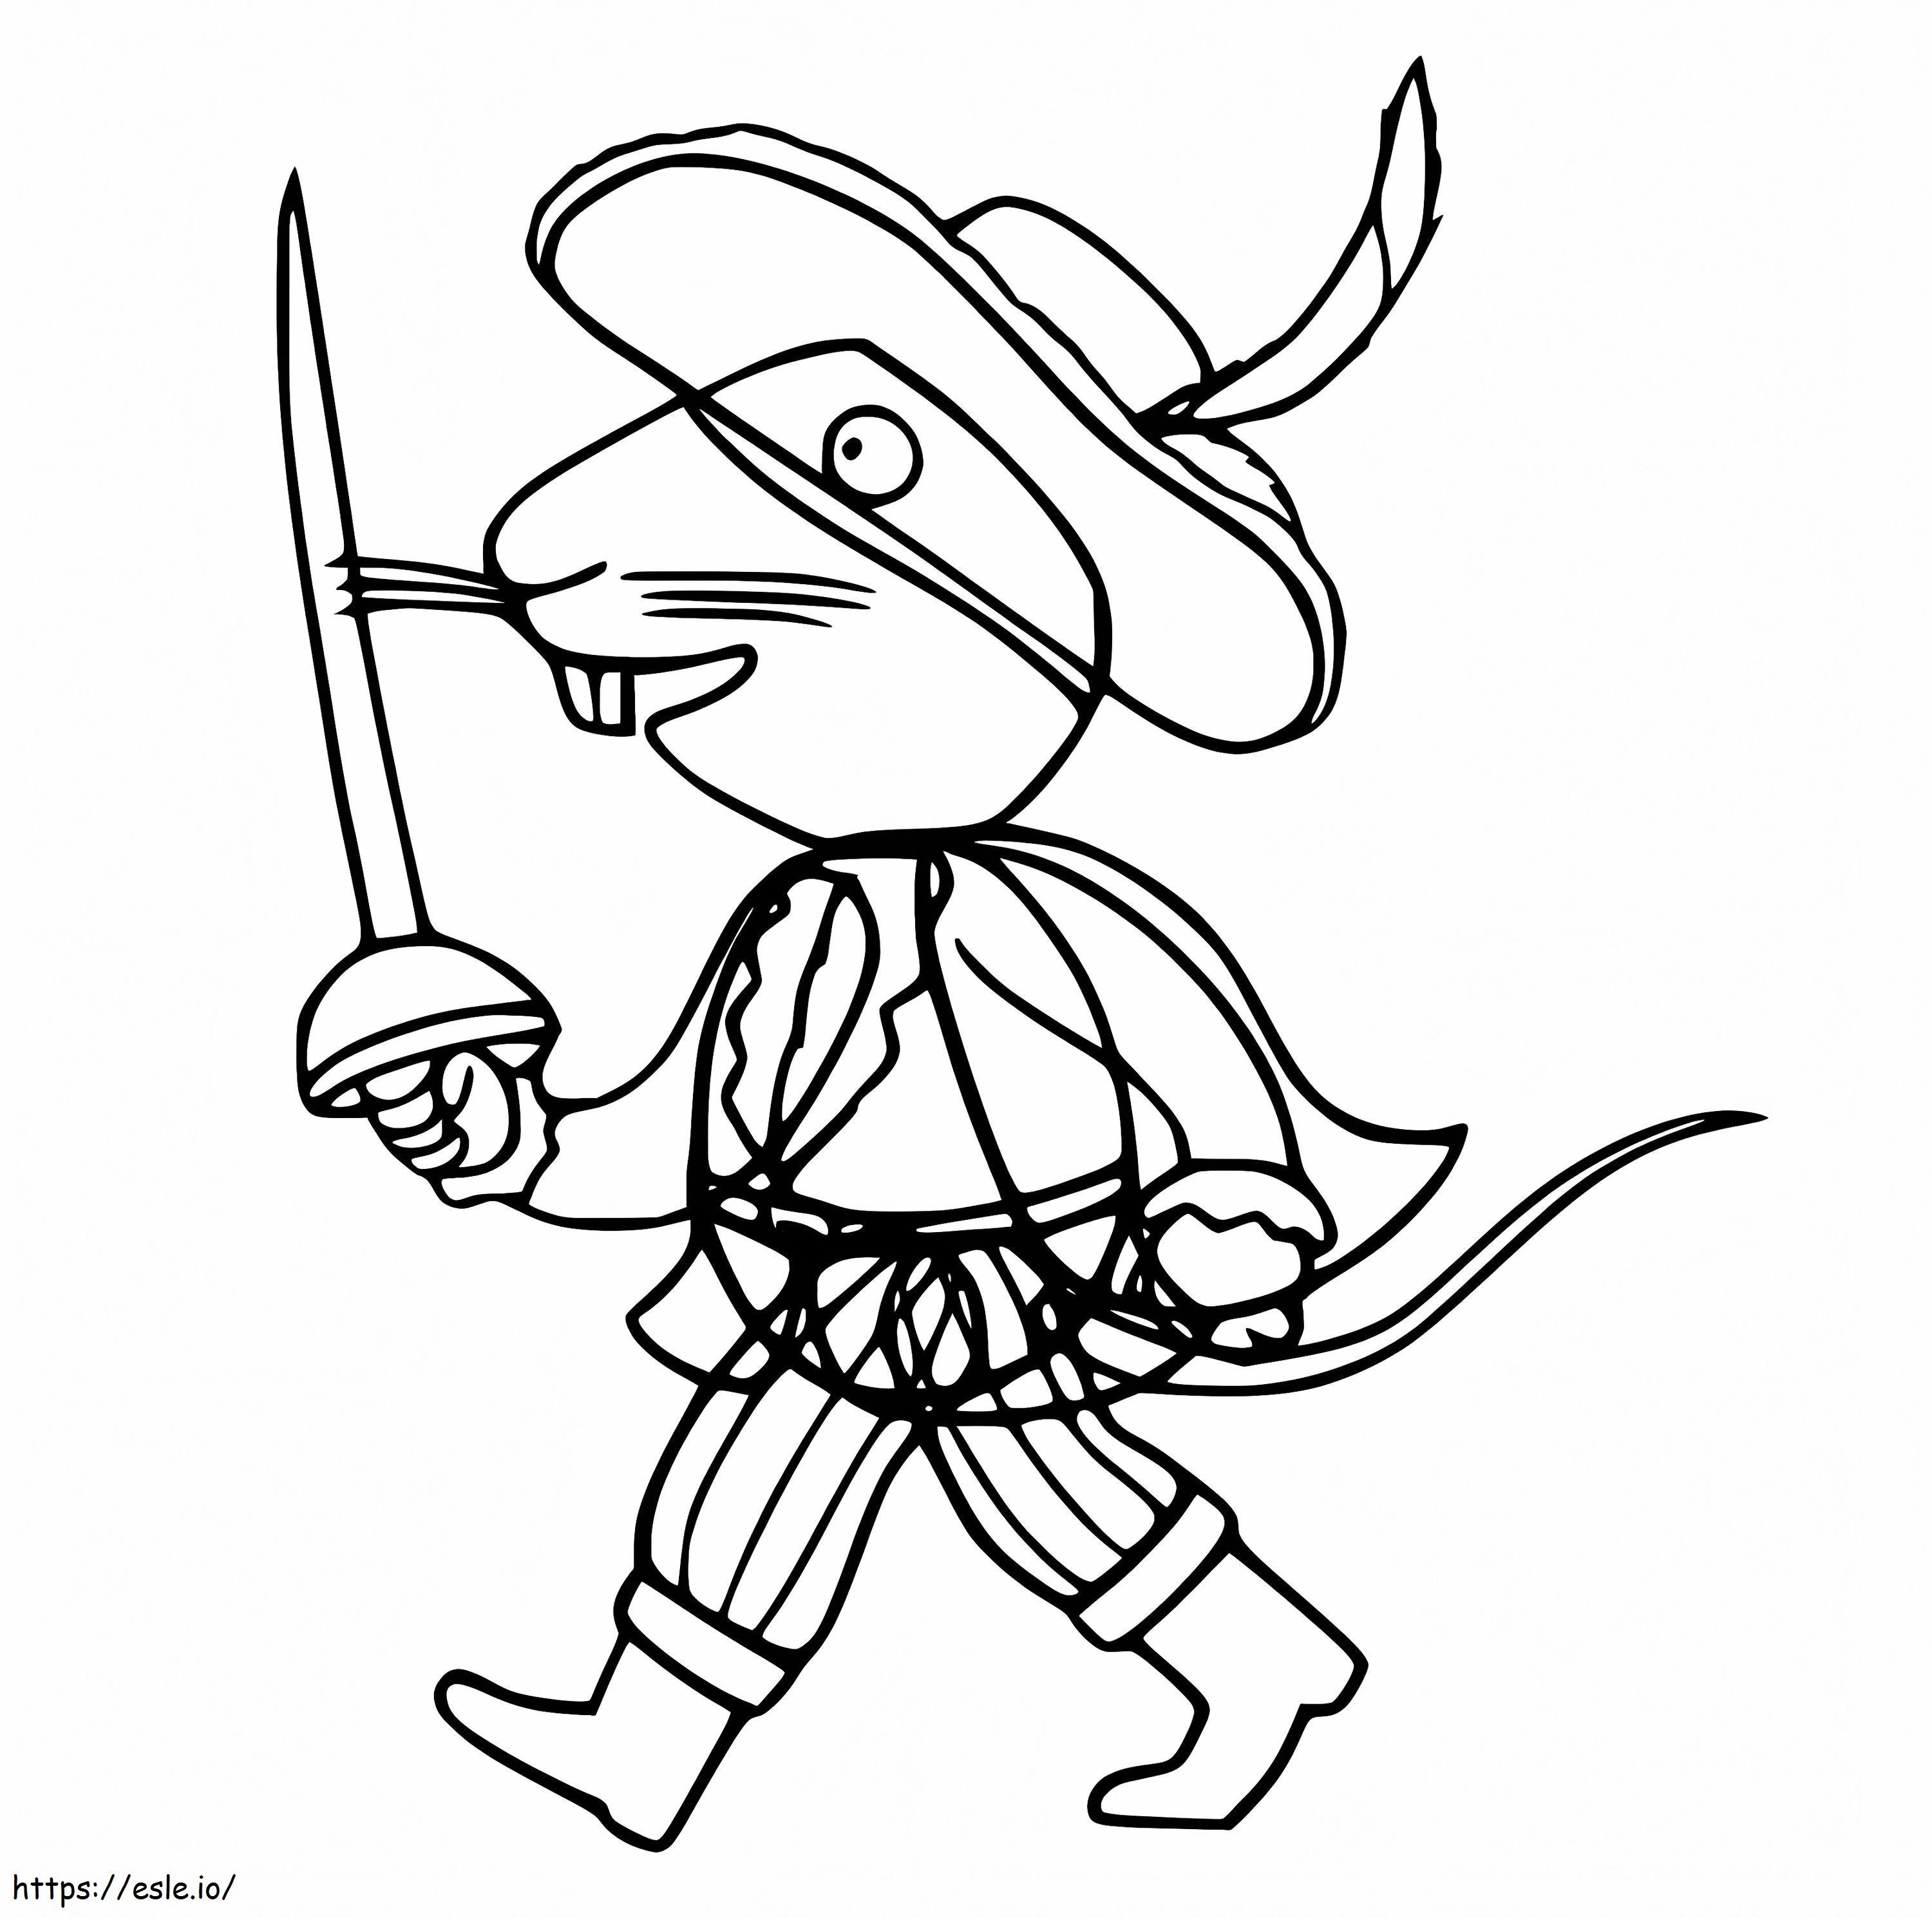 Highway Rat Holding Sword coloring page